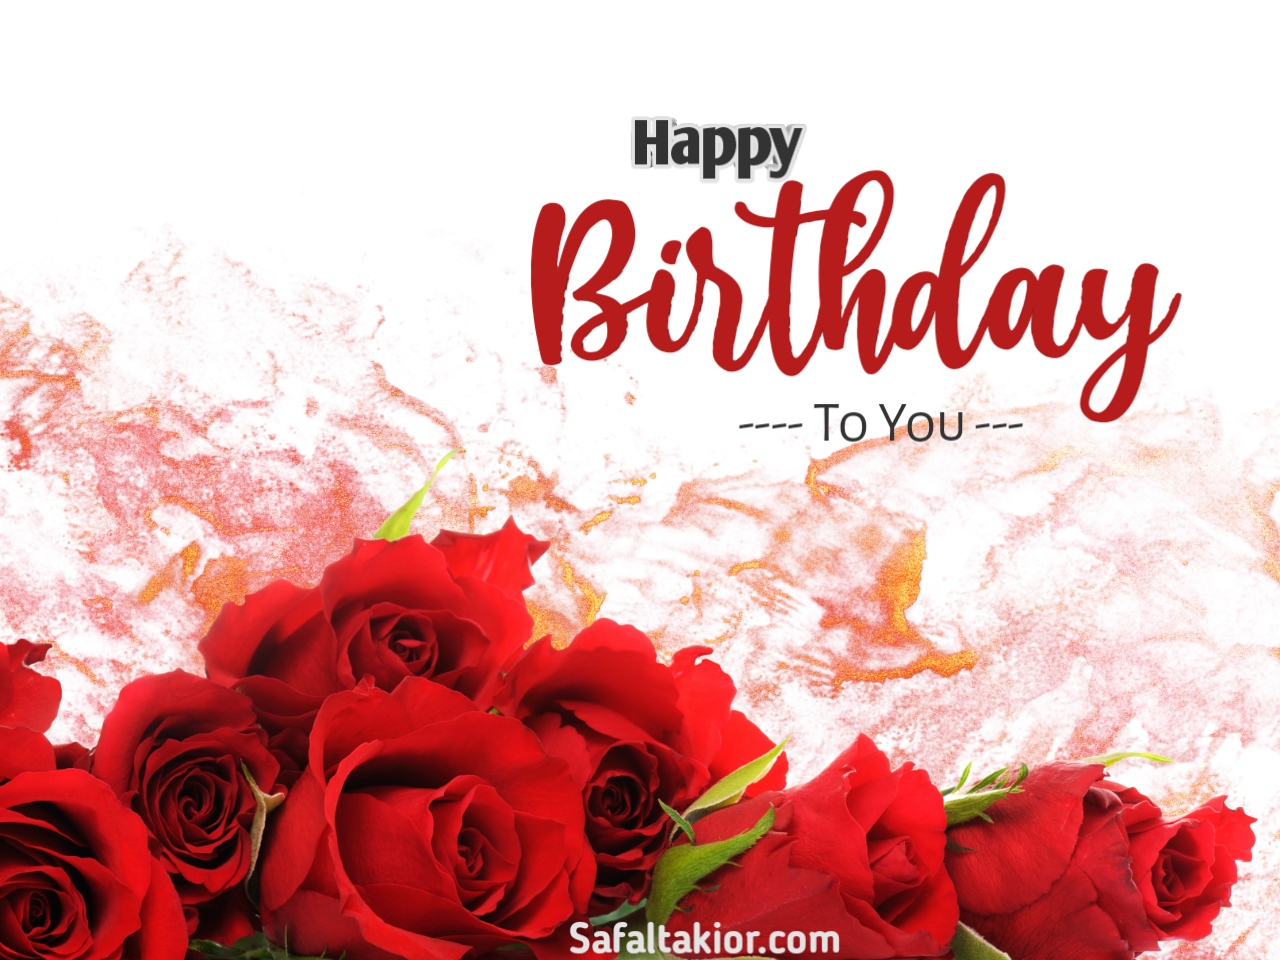 special happy birthday wishes images